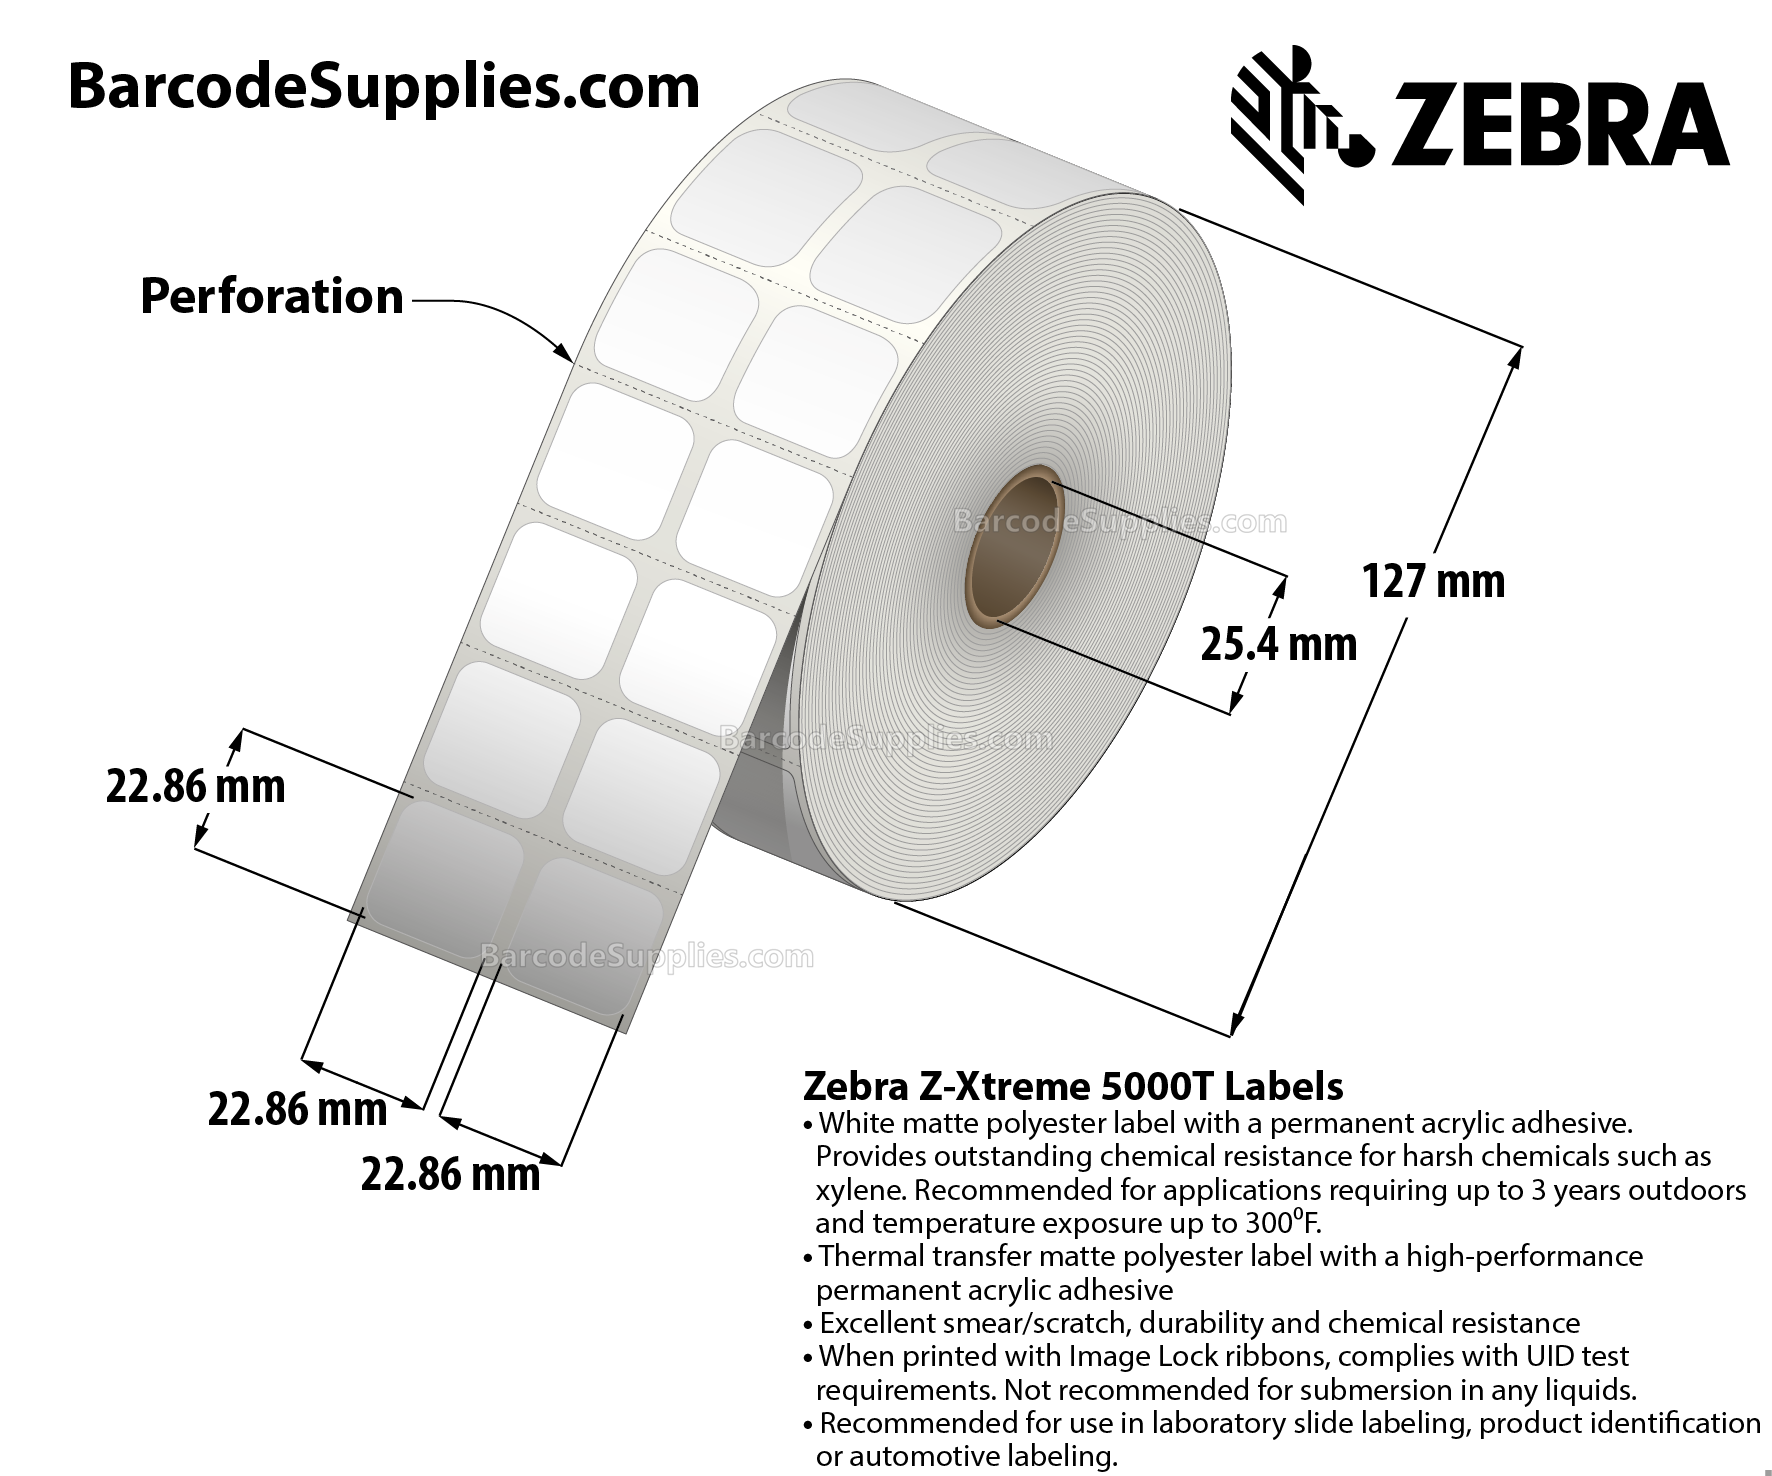 0.9 x 0.9 Thermal Transfer White Z-Xtreme 5000T (2-Across) Labels With Permanent Adhesive - Perforated - 1500 Labels Per Roll - Carton Of 1 Rolls - 1500 Labels Total - MPN: 10023250